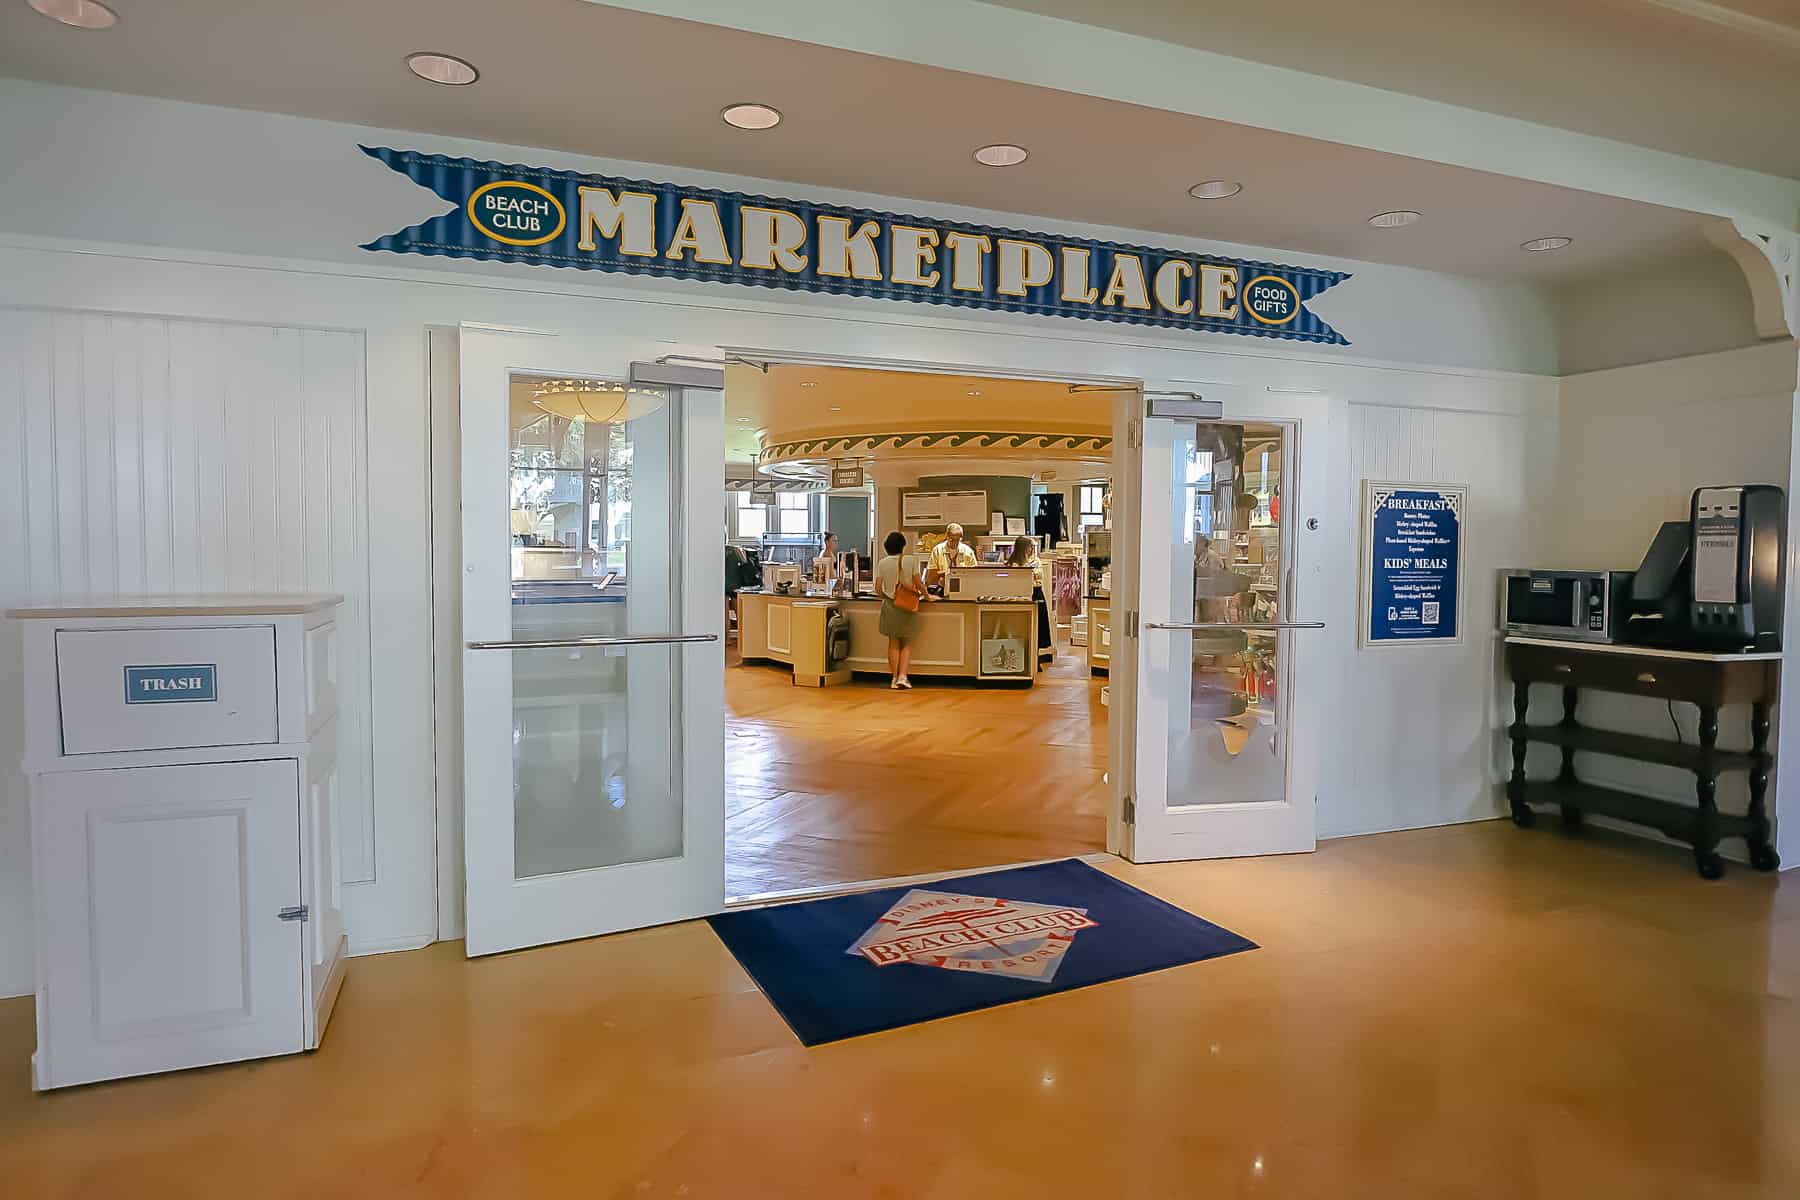 Beach Club Marketplace Review (The Quick Service Restaurant at Disney’s Beach Club)